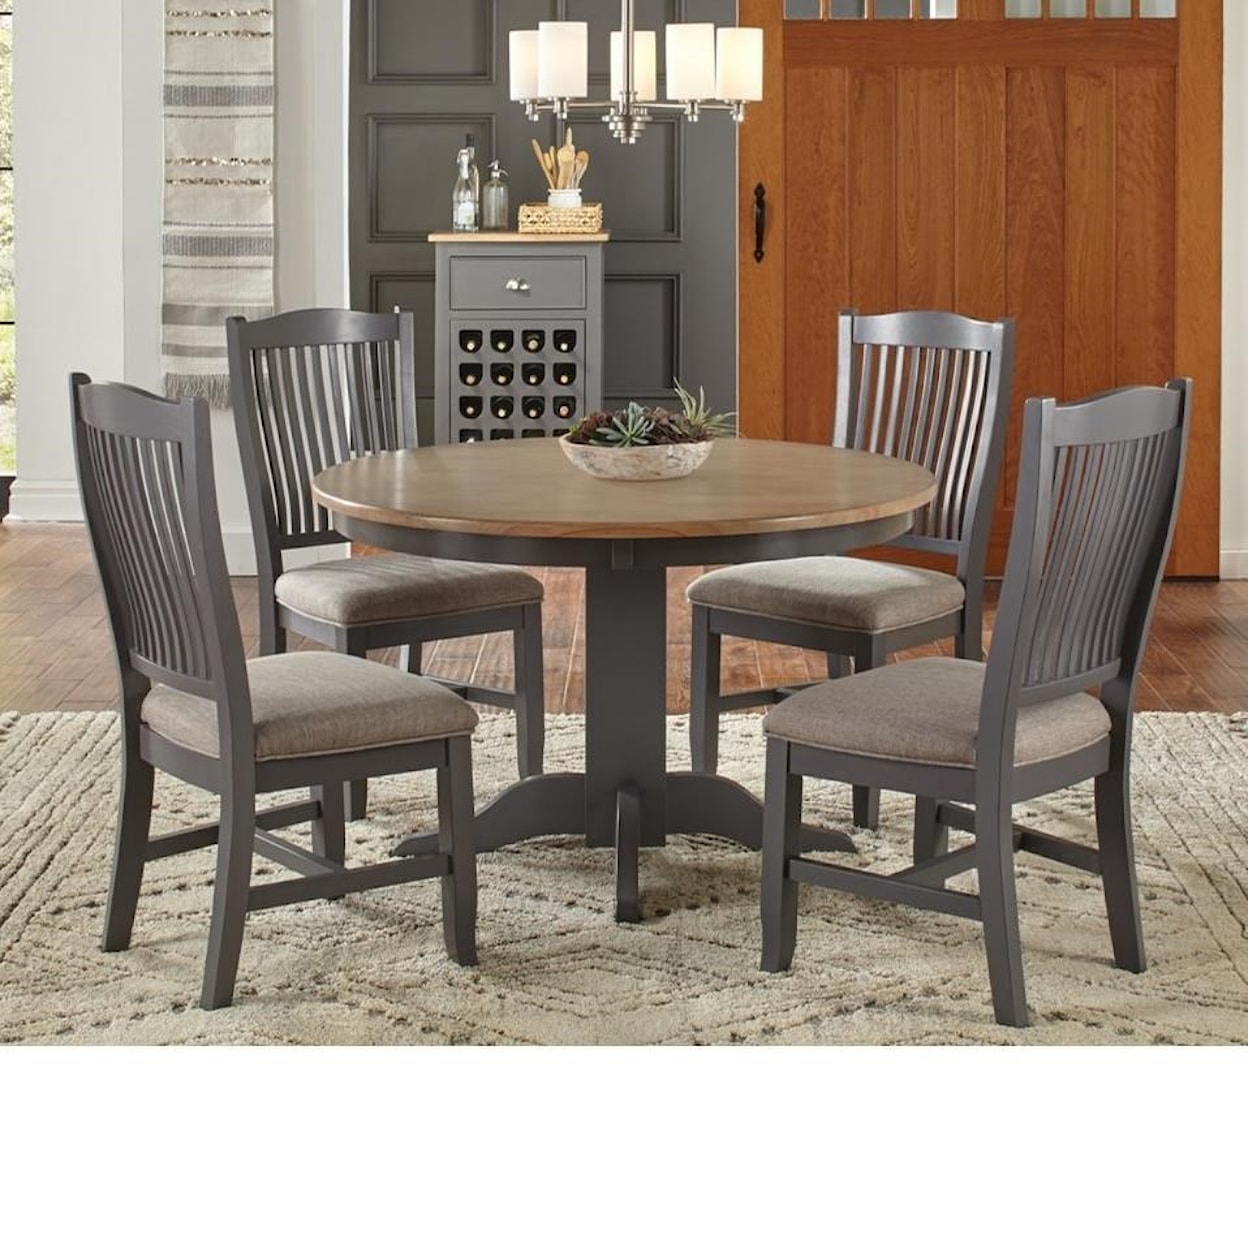 AAmerica Port Townsend 5 Pc Table Set